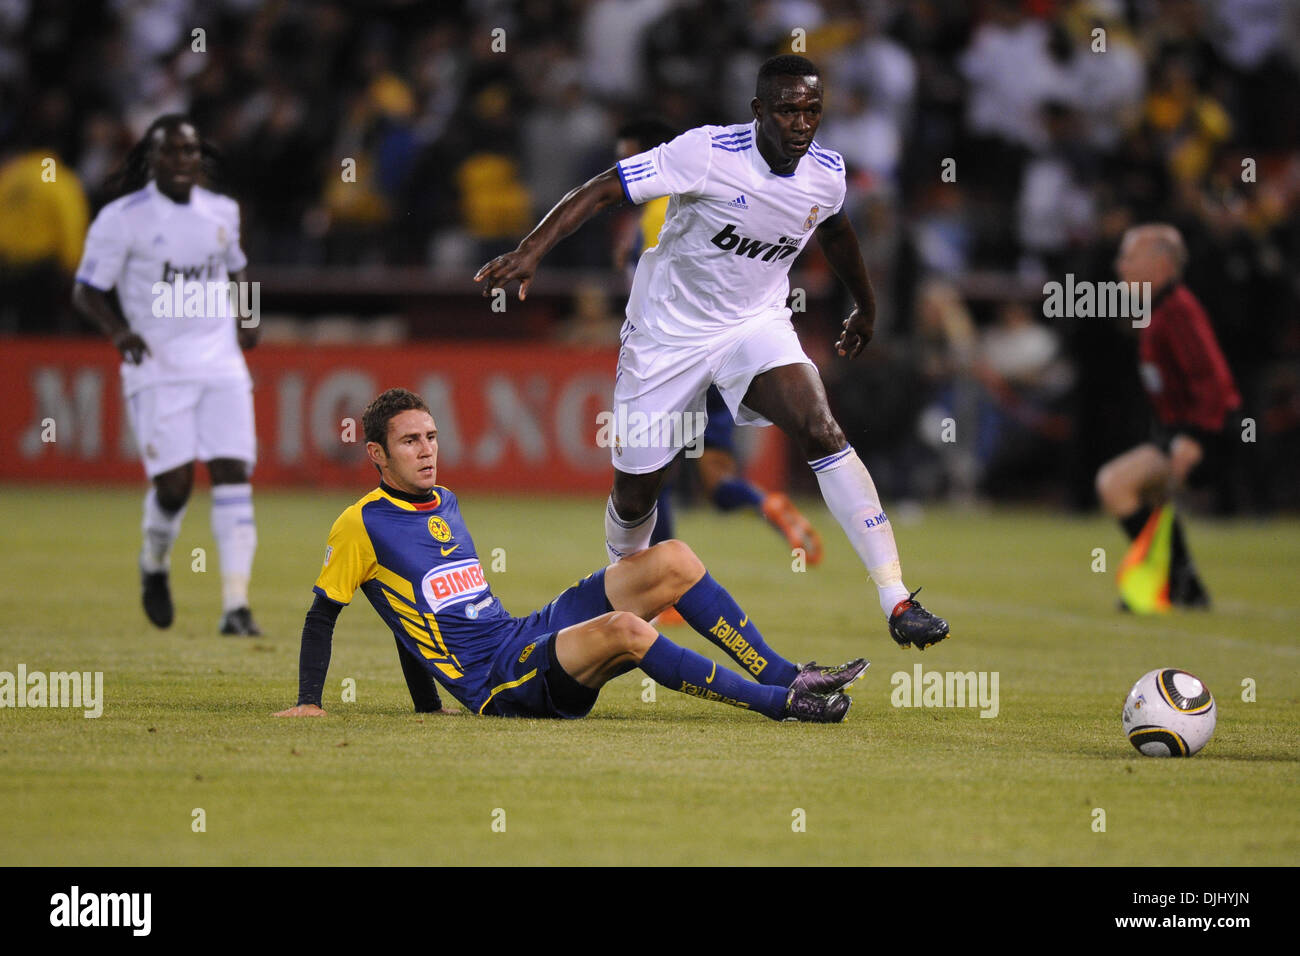 Aug. 04, 2010 - San Francisco, California, United States of America - August 4, 2010: Club America M Miguel Layun (19) trips up Real Madrid M Mahamadou Diarra (6) during the friendly between Real Madrid and Club America at Candlestick Park in San Francisco, CA.  Real Madrid took the contest 3-2..Mandatory Credit: Matt Cohen / Southcreek Global (Credit Image: © Southcreek Global/ZUM Stock Photo